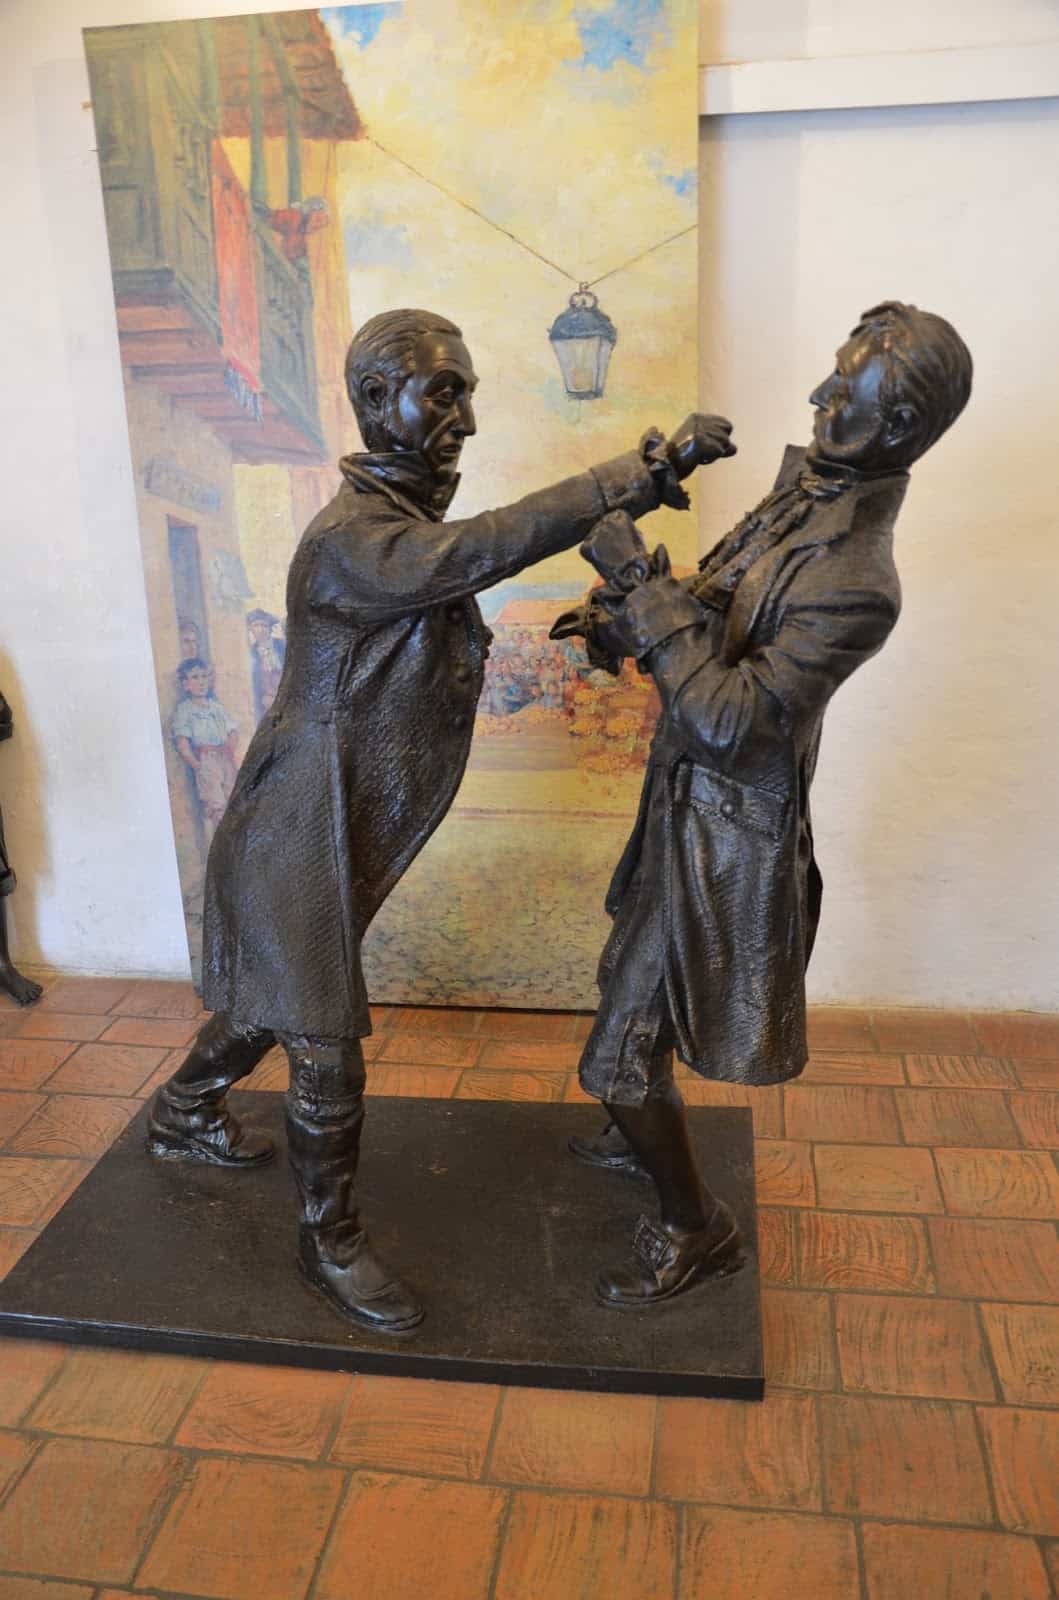 Sculpture of the fistfight at the Independence Museum